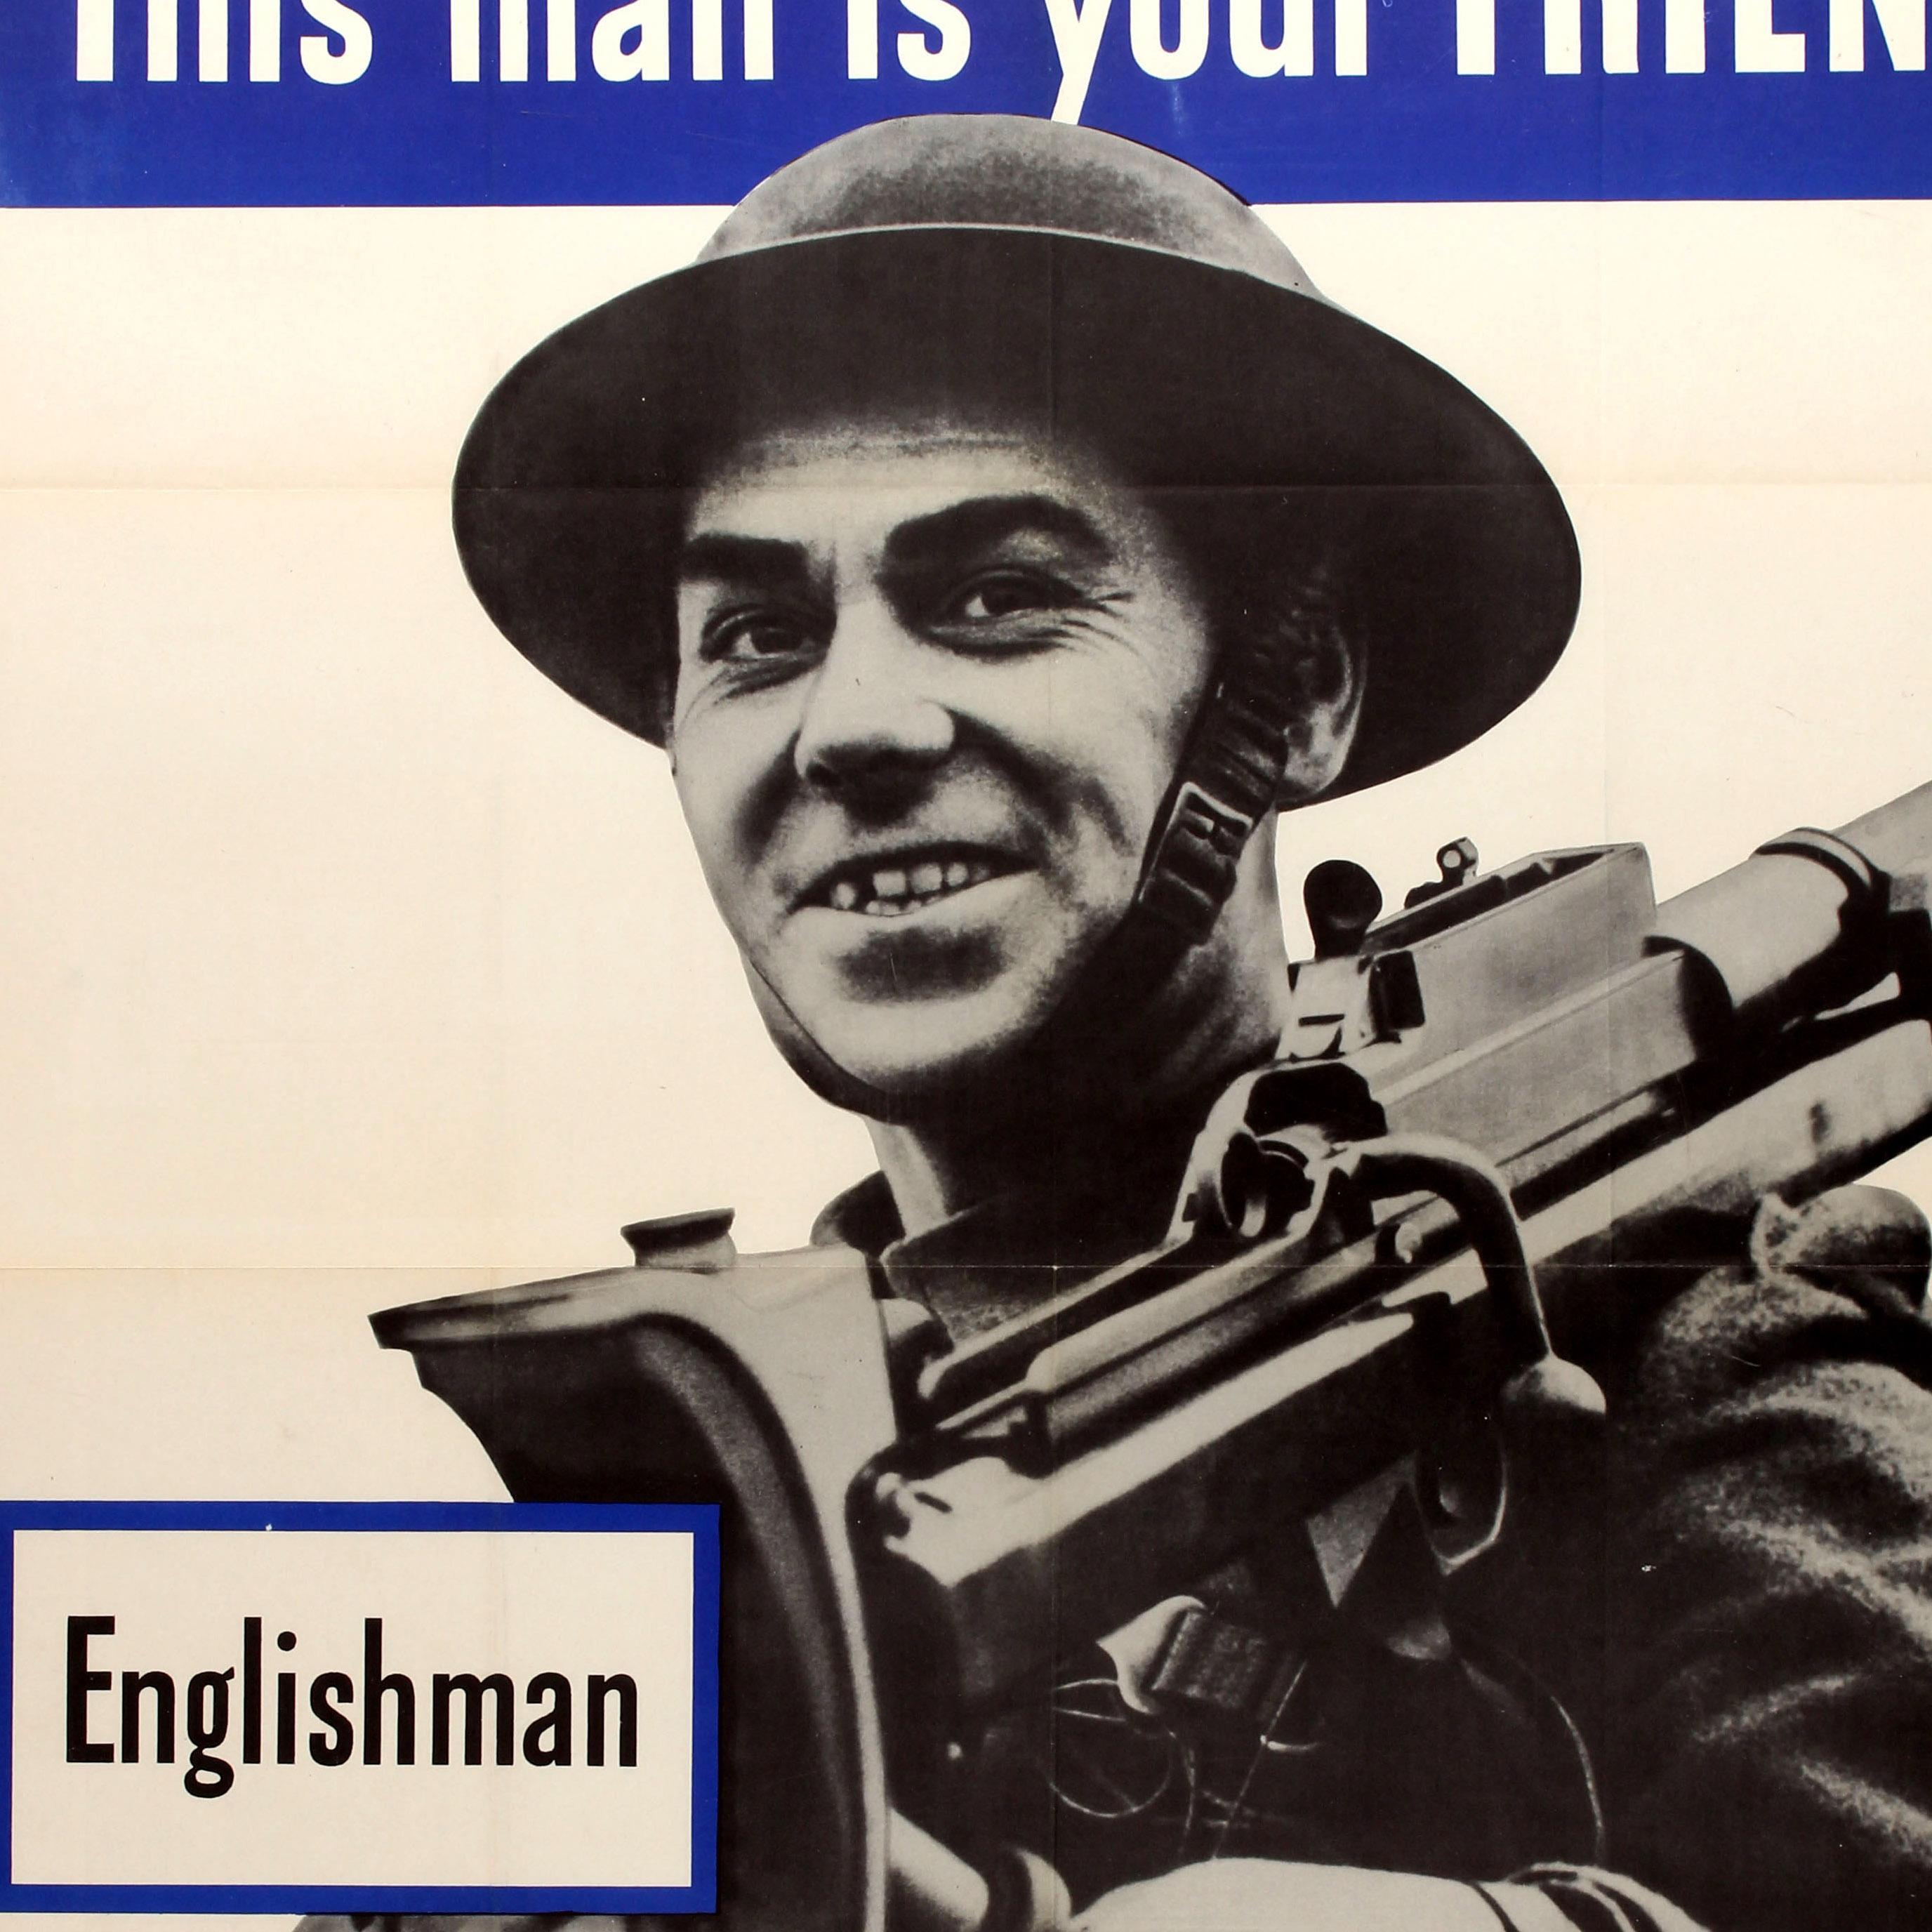 Original WWII Poster - Englishman This Man Is Your Friend He Fights For Freedom - Print by Unknown